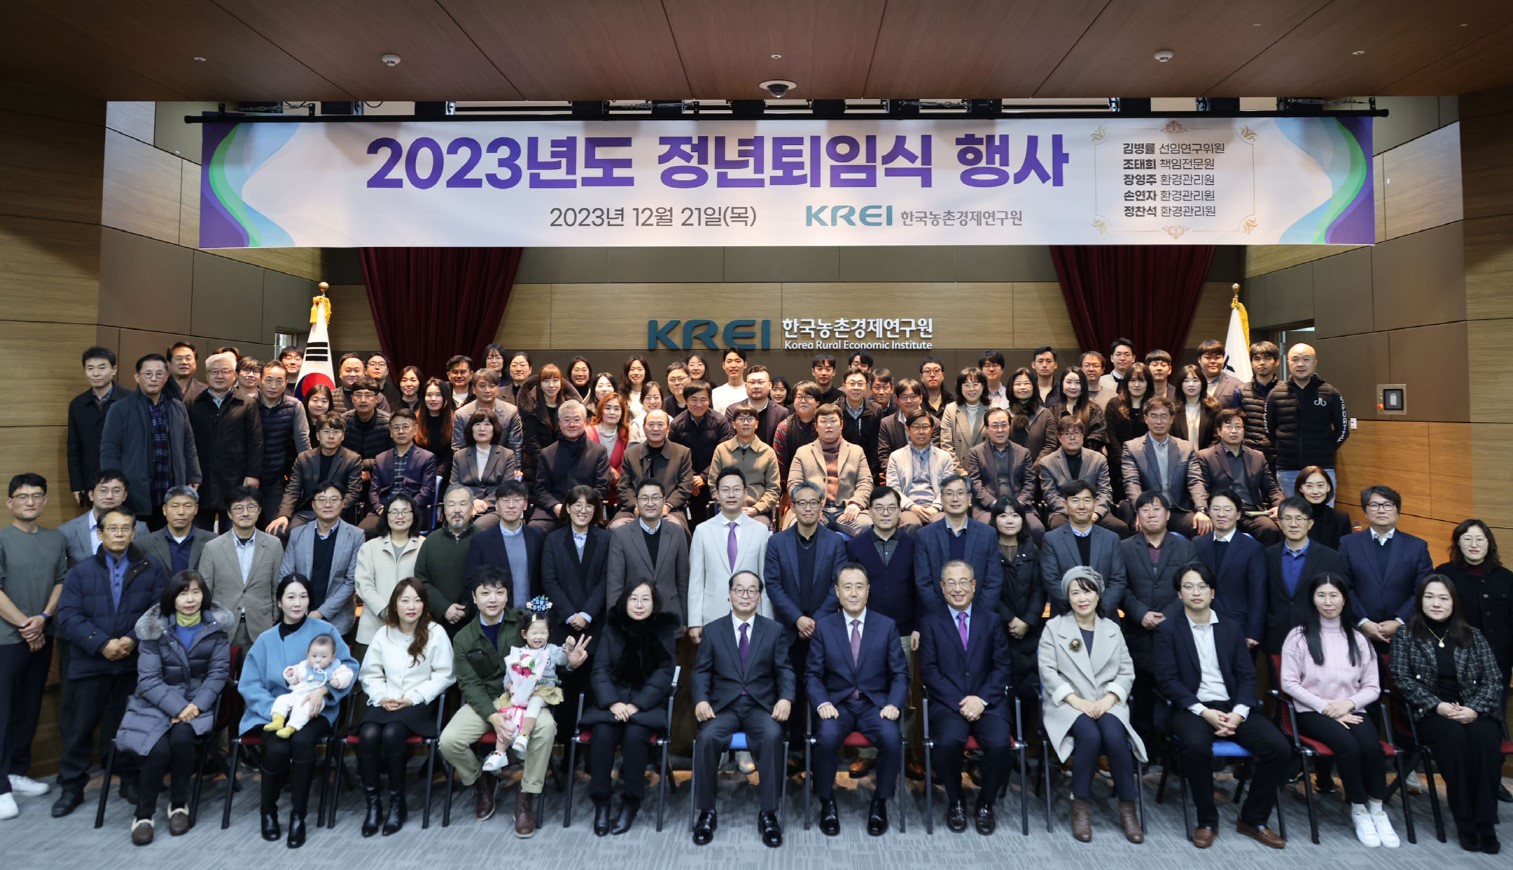 The 2023 Retirement Ceremony and Year-End Event